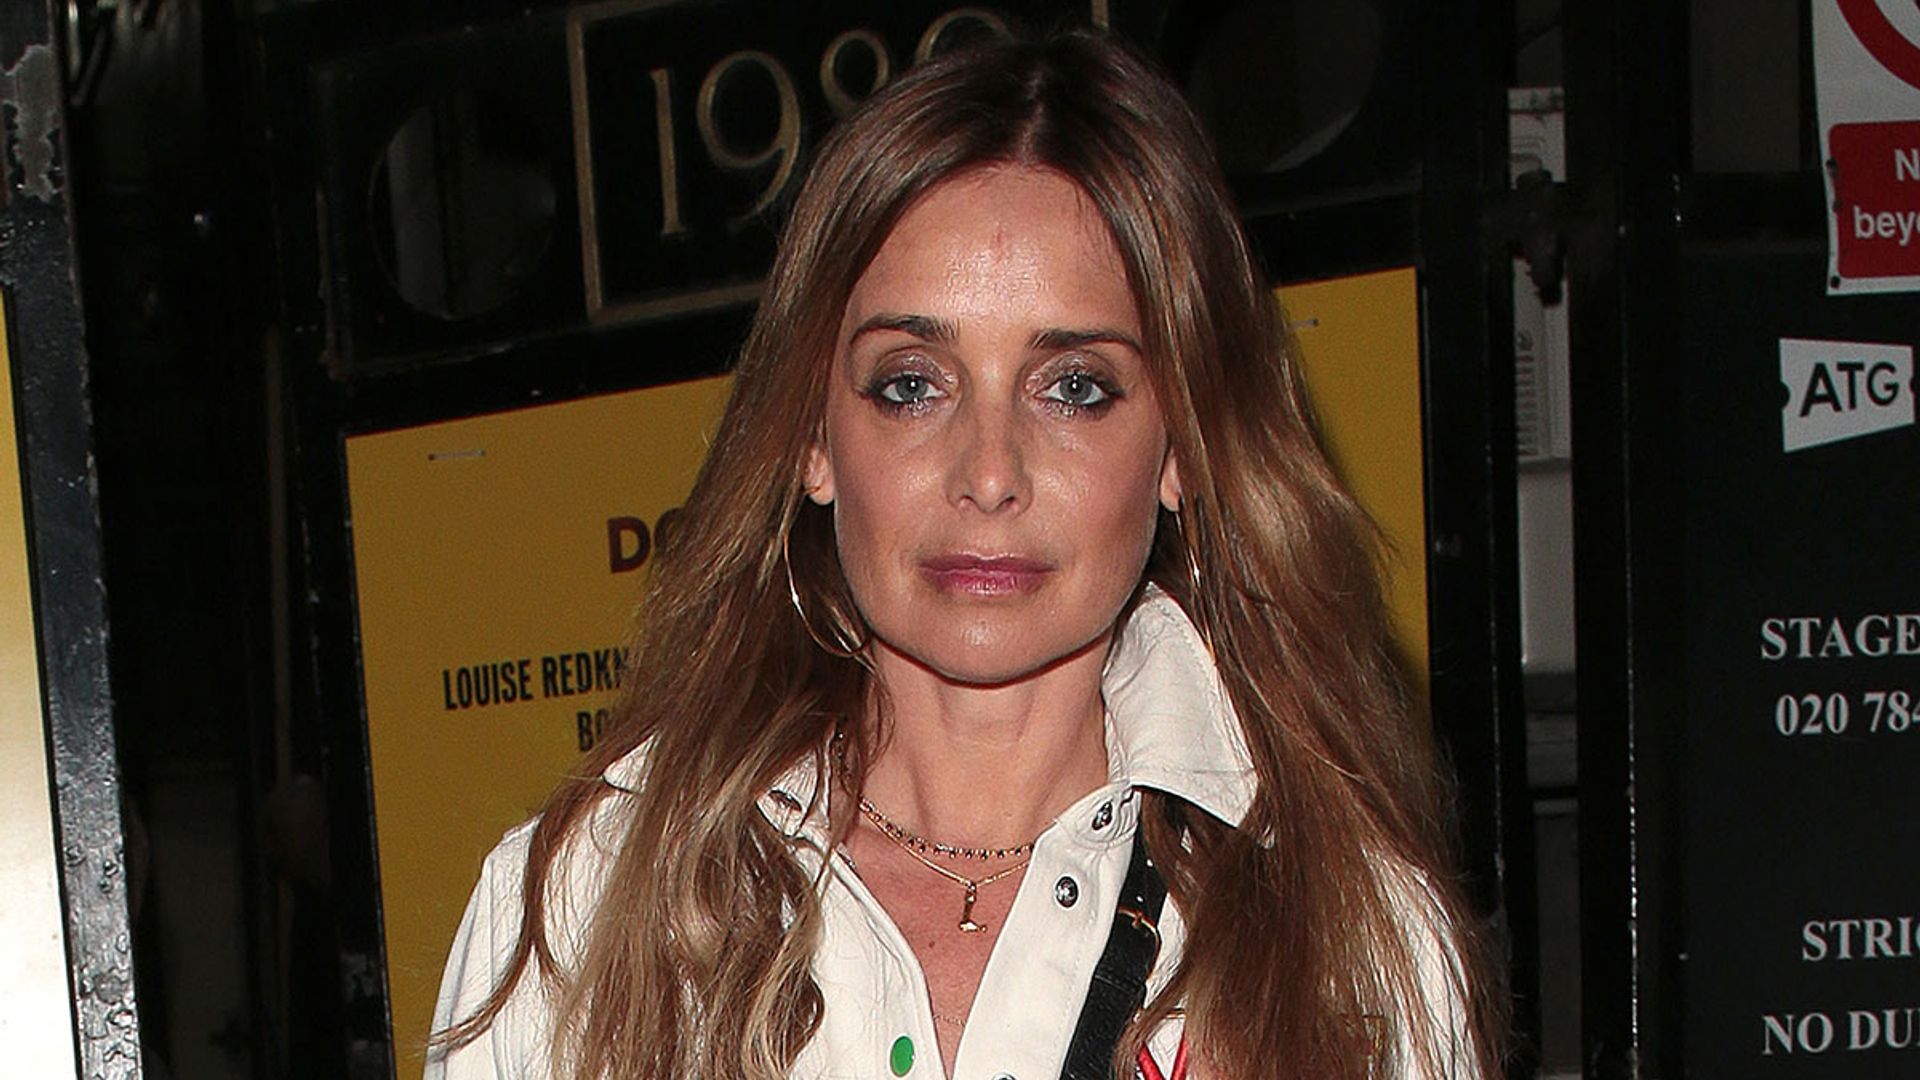 Louise Redknapp ordered to appear in court after 'running a red light'